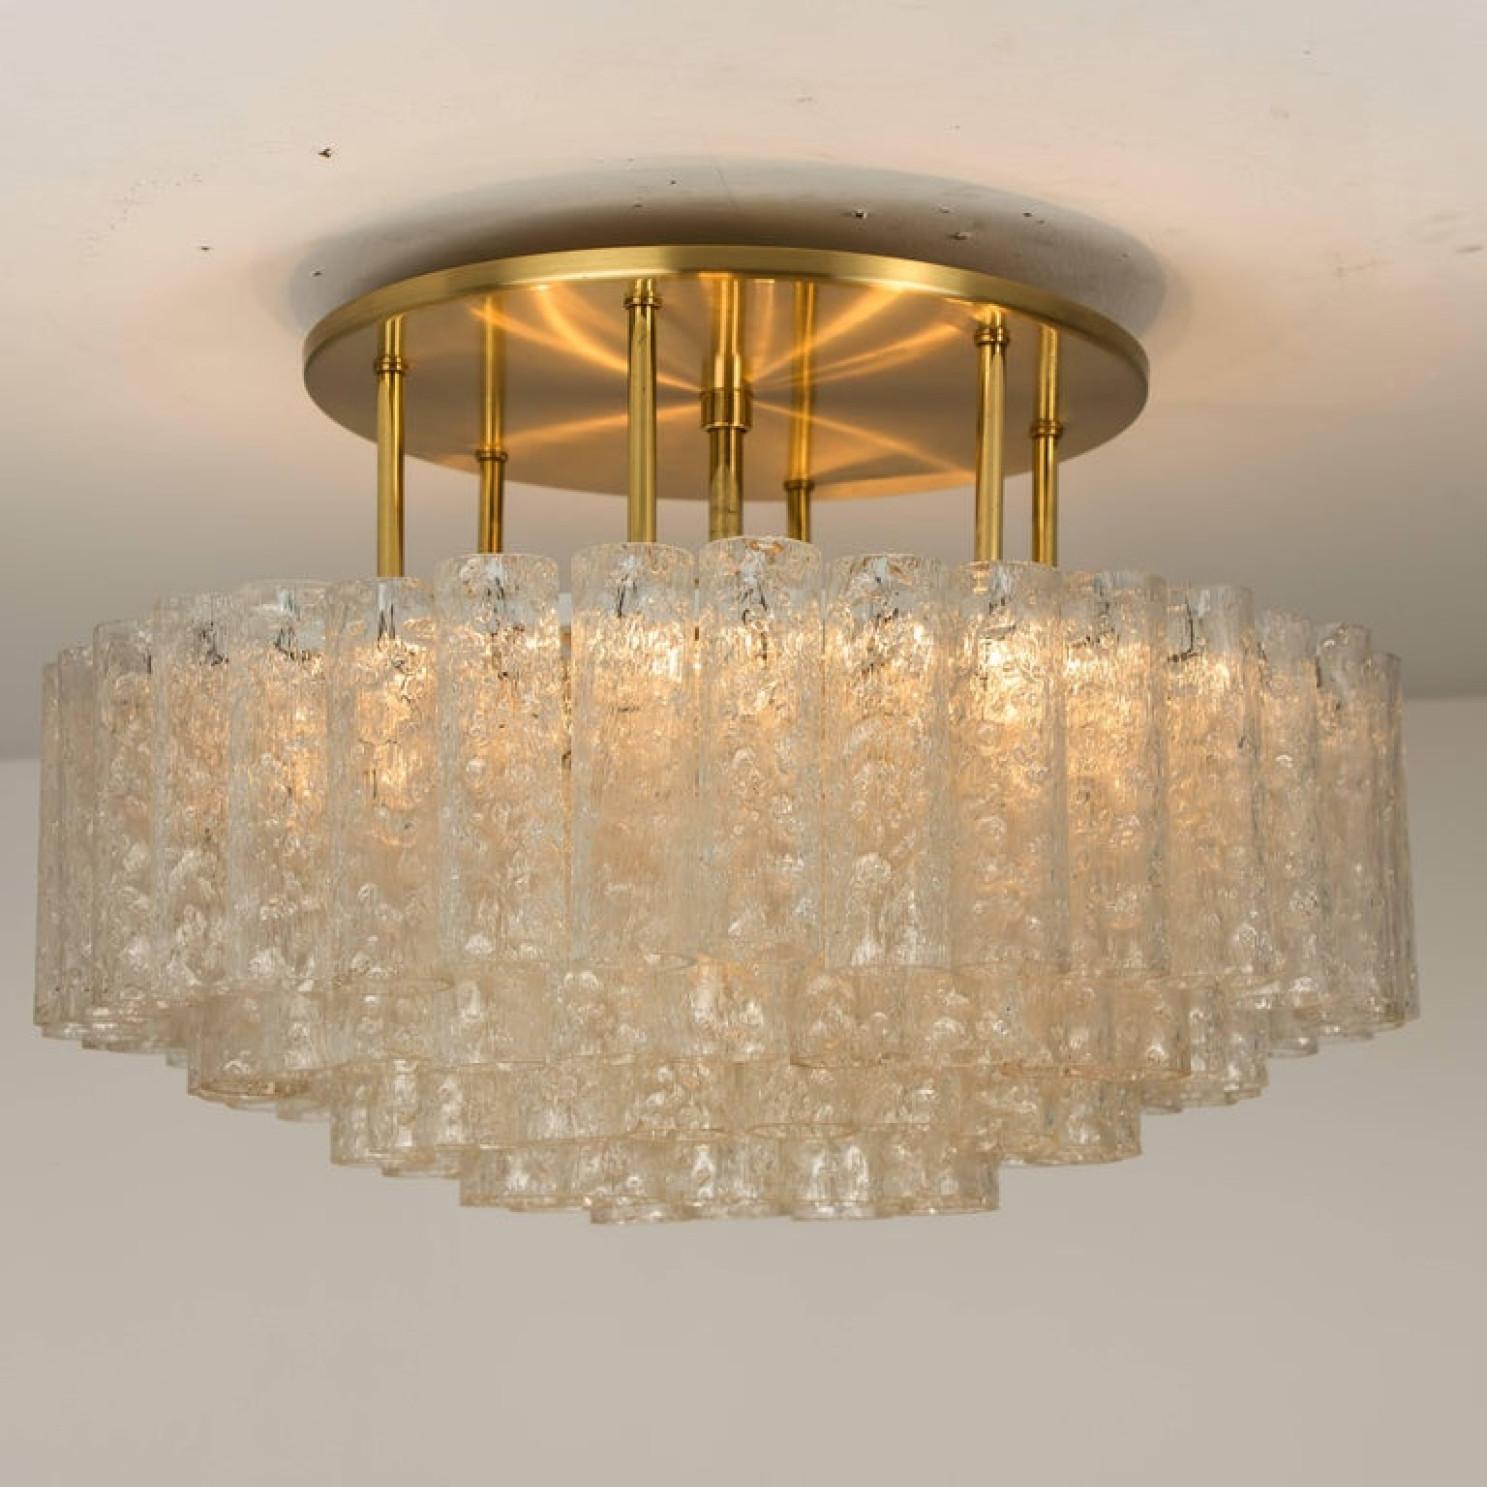 One of the Six Large Blown Glass Brass Flush Mount Light Fixtures by Doria 1960s For Sale 10